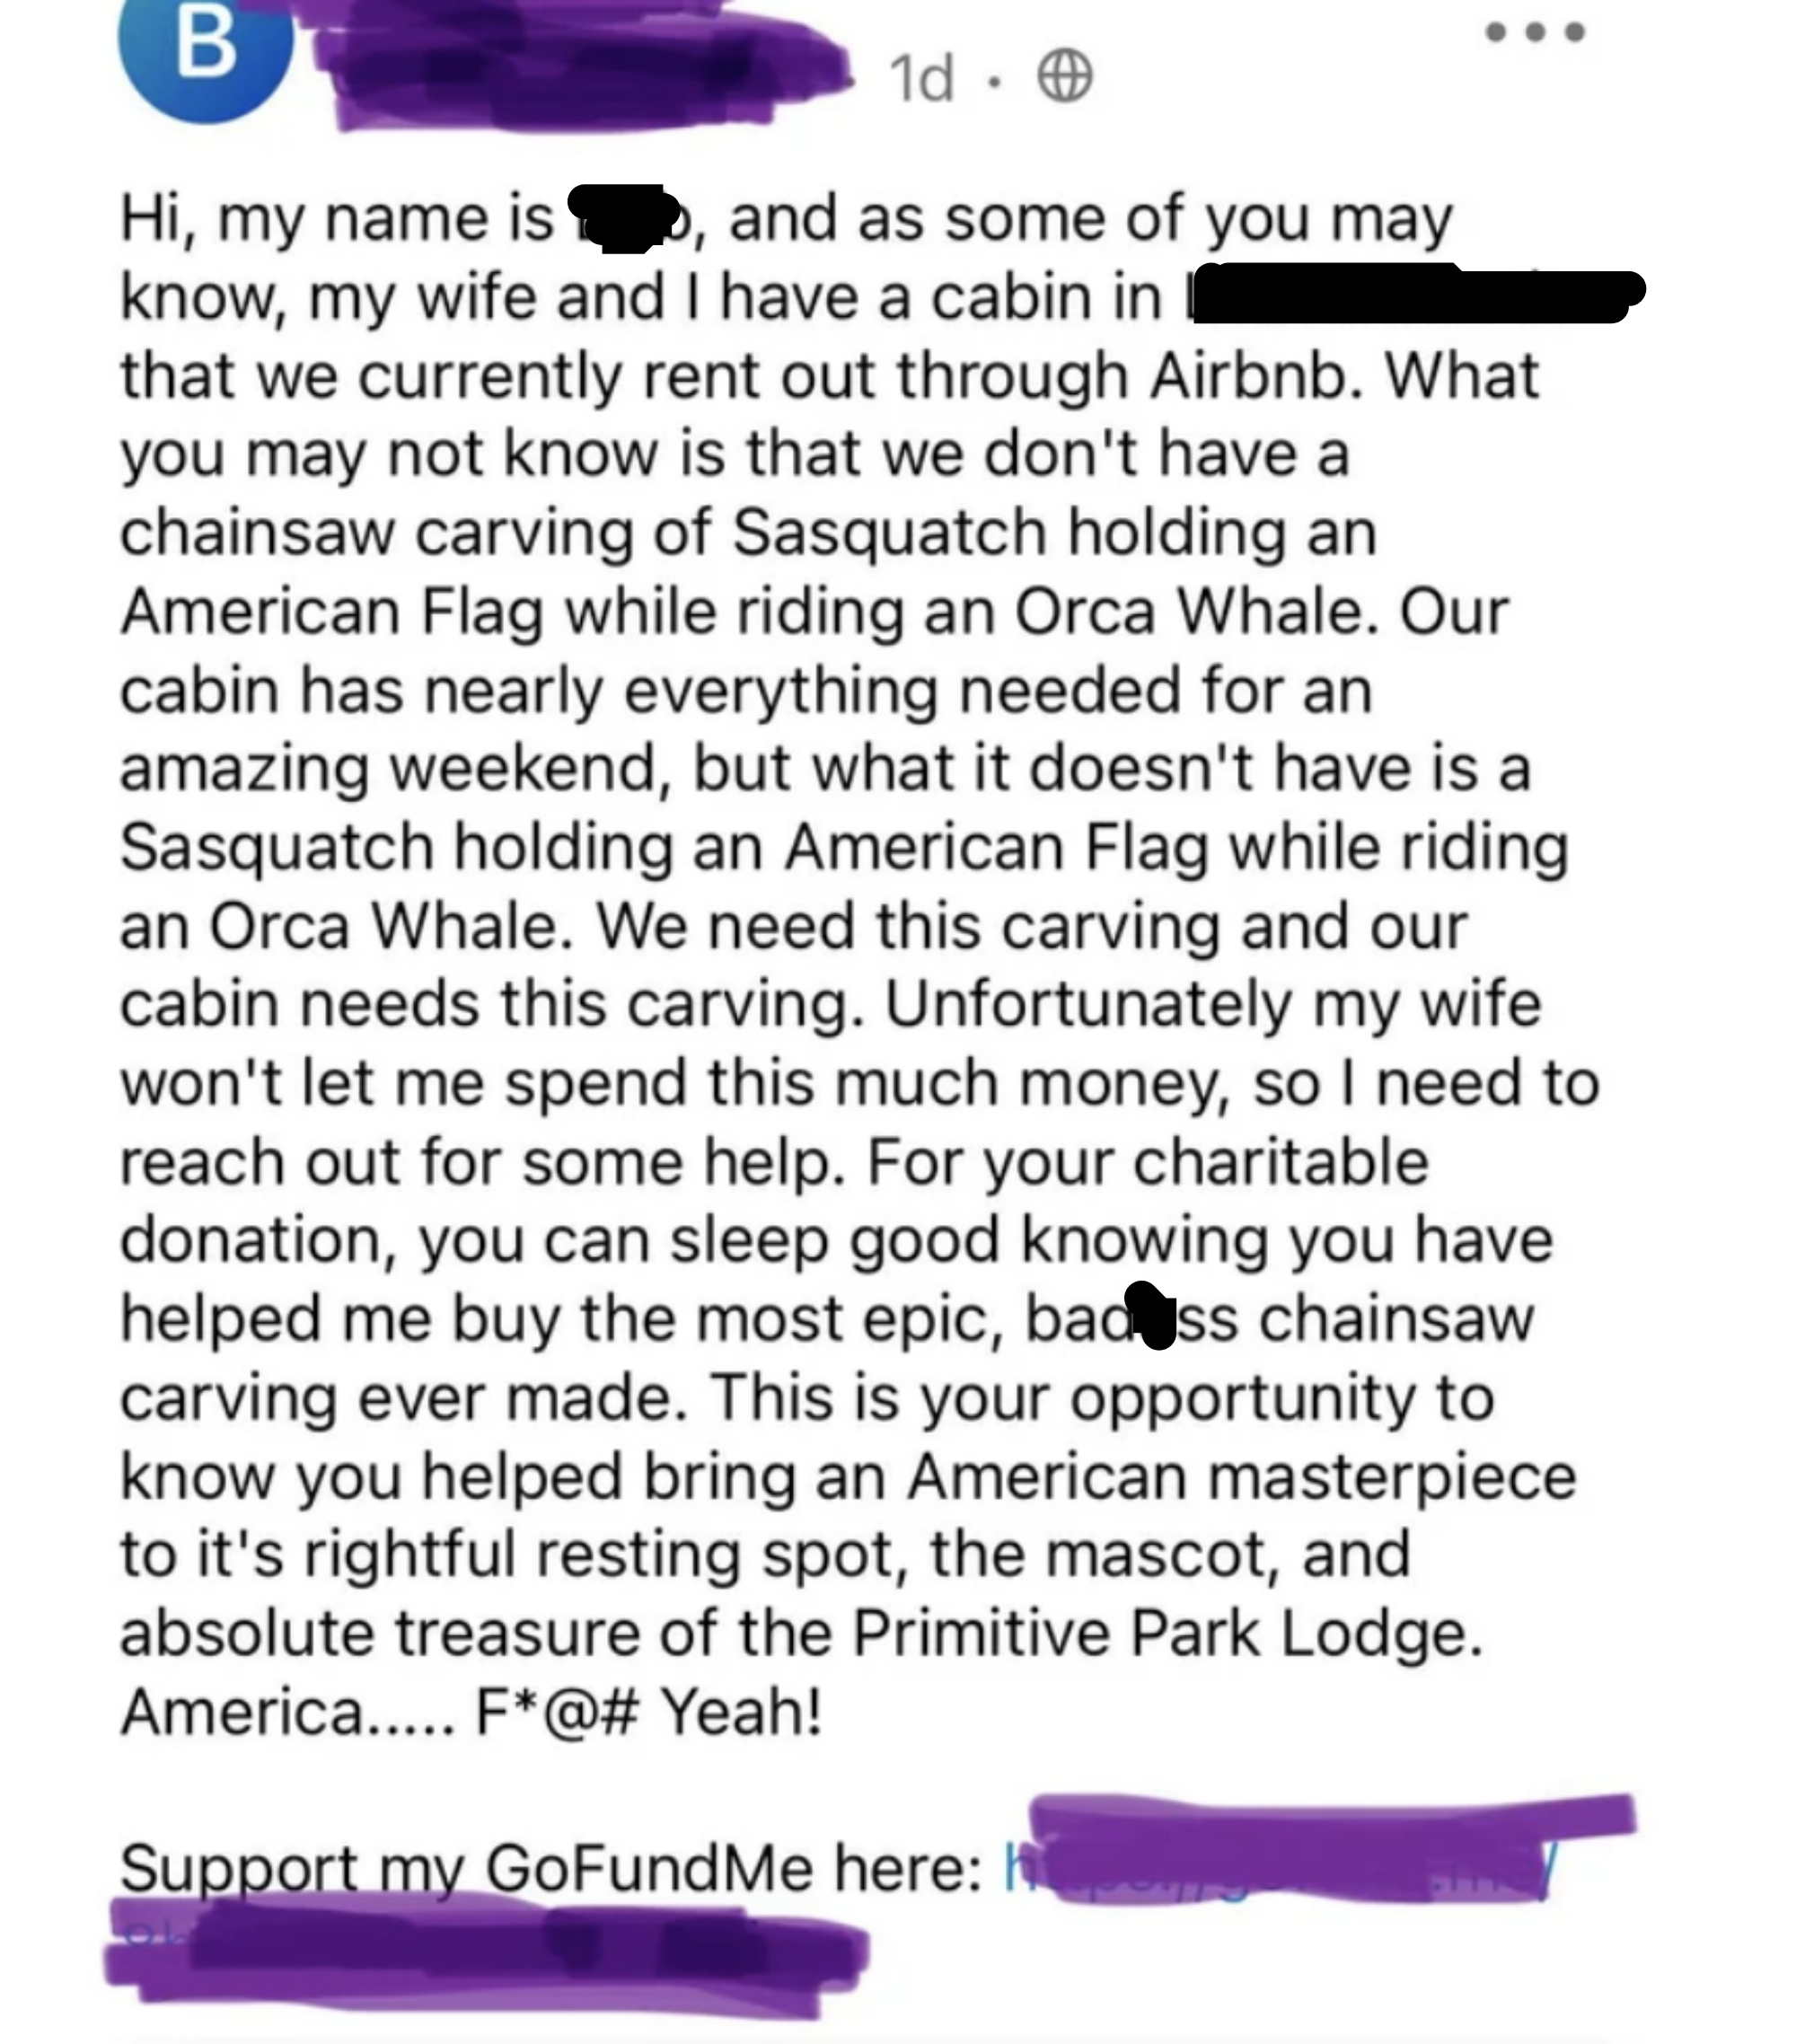 They have a cabin that they rent out on Airbnb, but they want to add a chainsaw carving of Sasquatch holding a US flag while riding an orca whale, but their wife won&#x27;t let them spend the money, so they&#x27;re asking for a &quot;charitable donation&quot;&quot;T